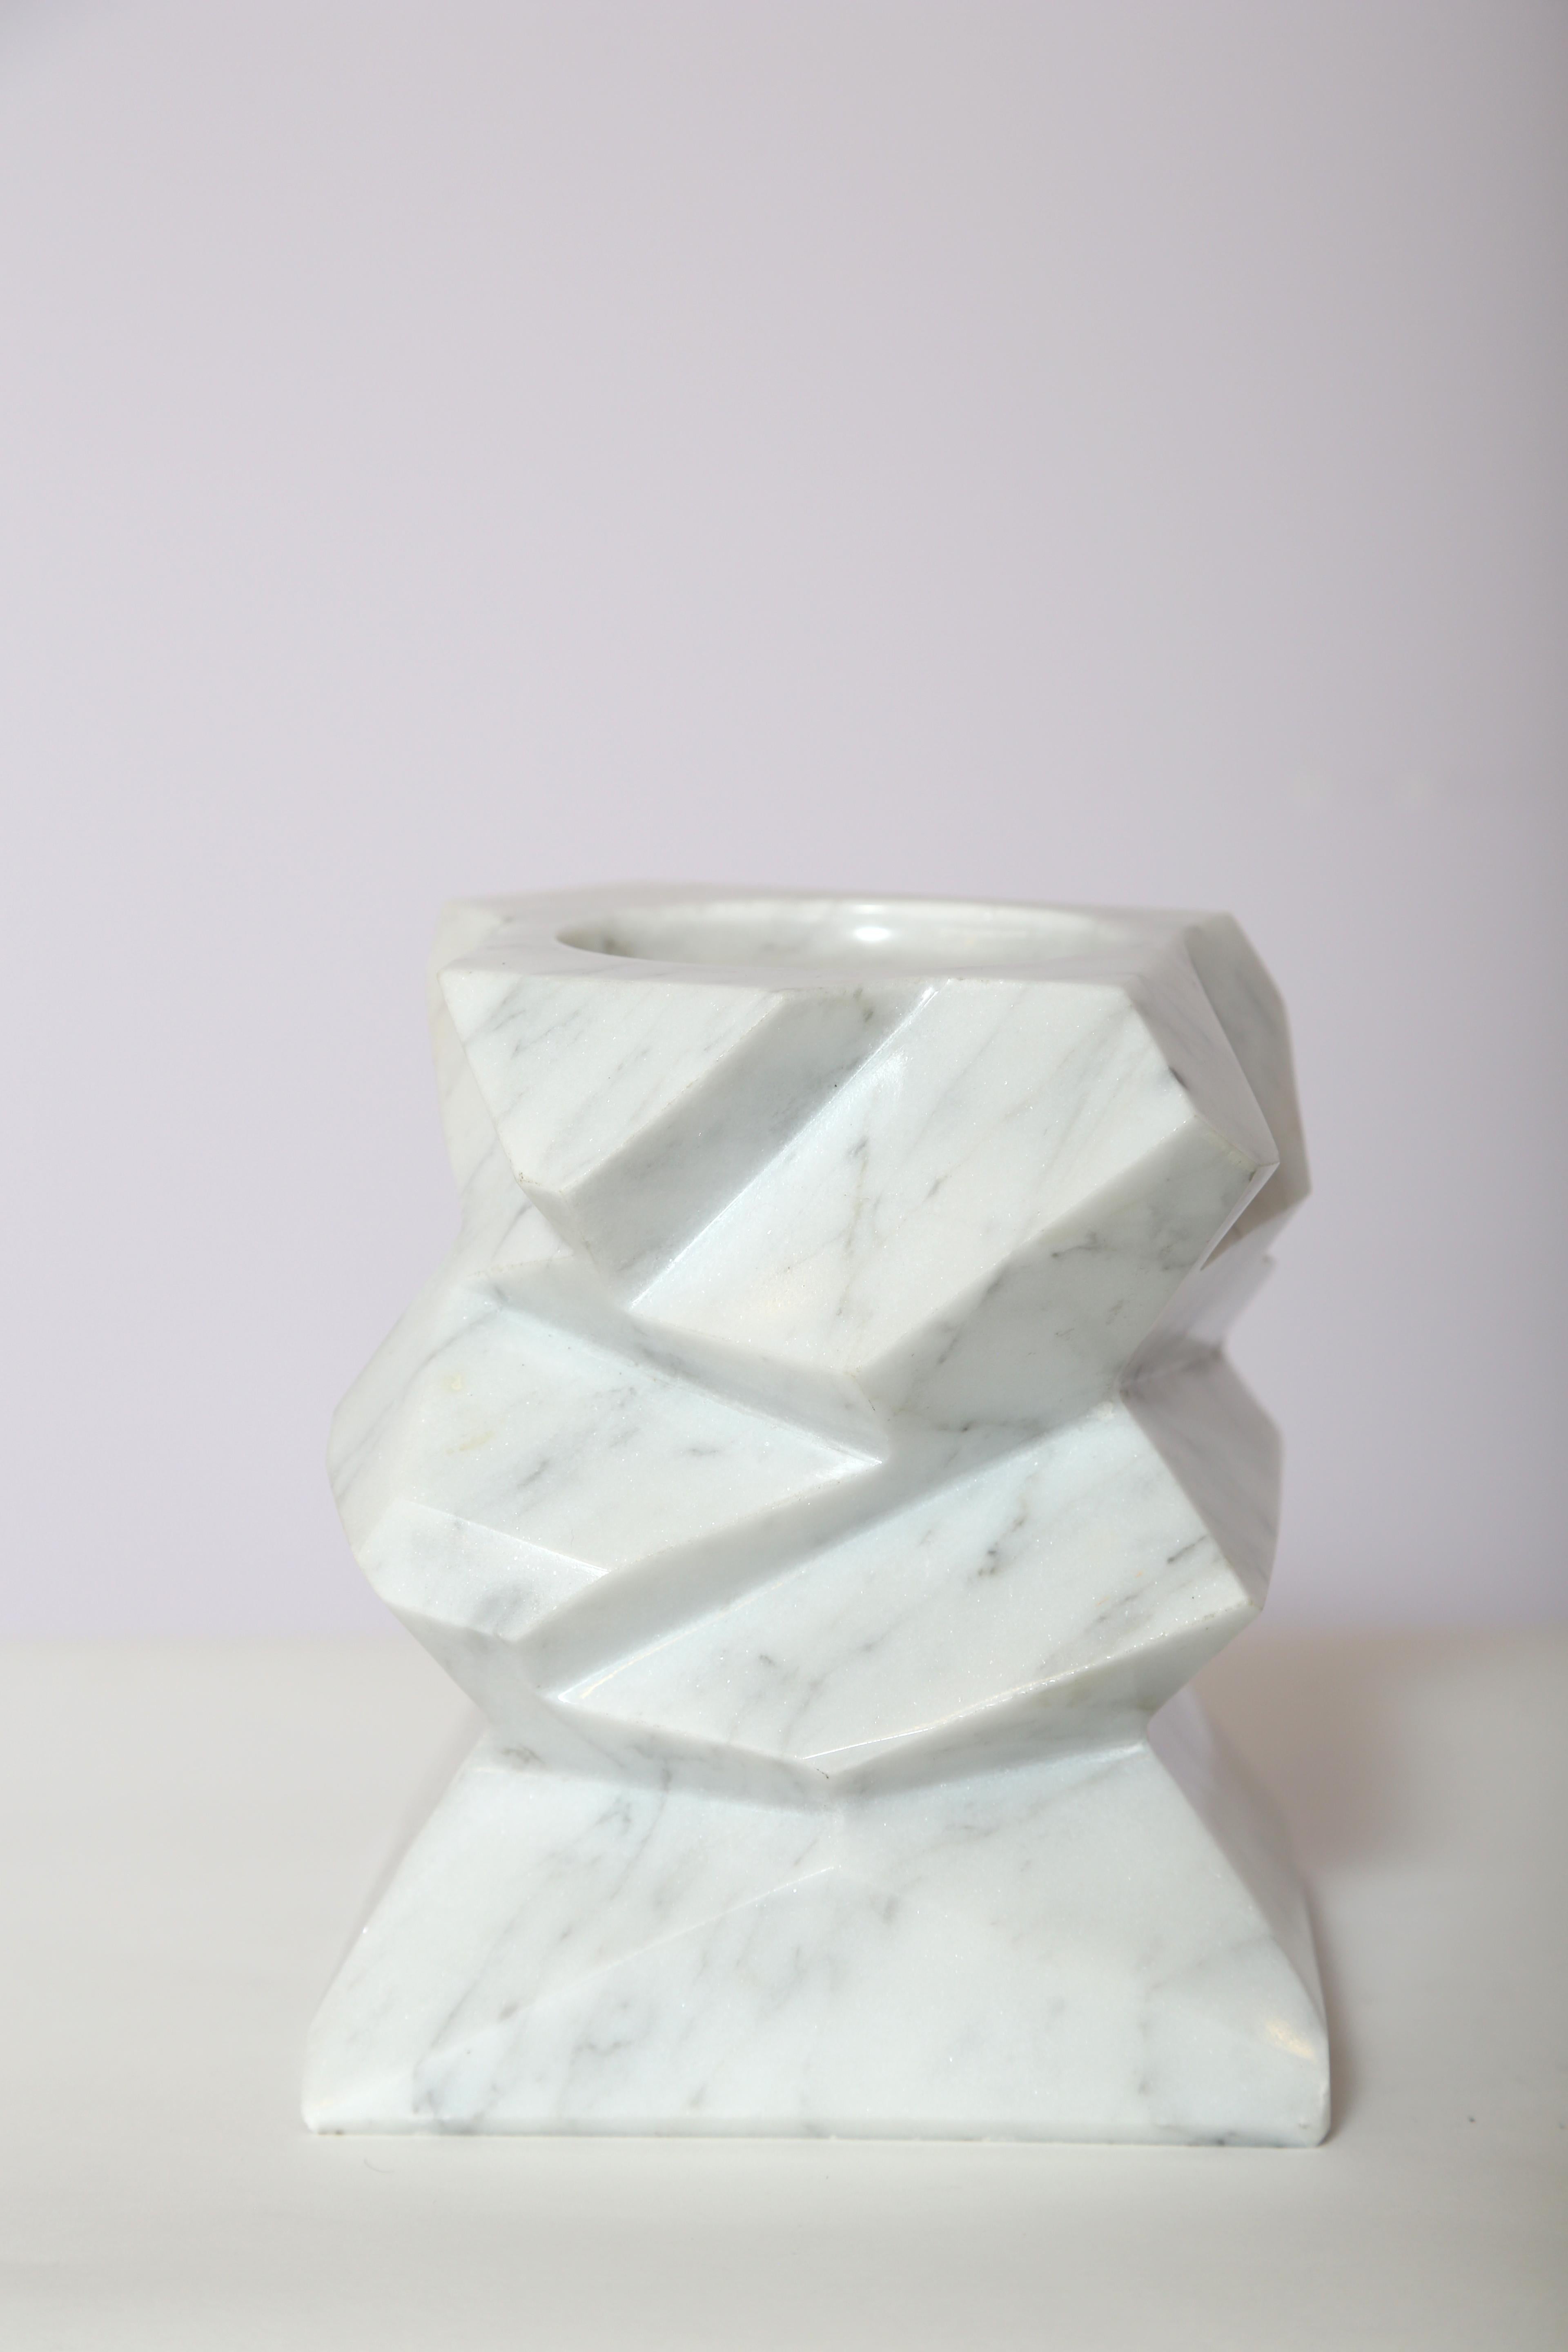 Rock candleholder in bianco Carrara. Handmade in Italy, this piece is available in Negro Marquina.
Measures: 5